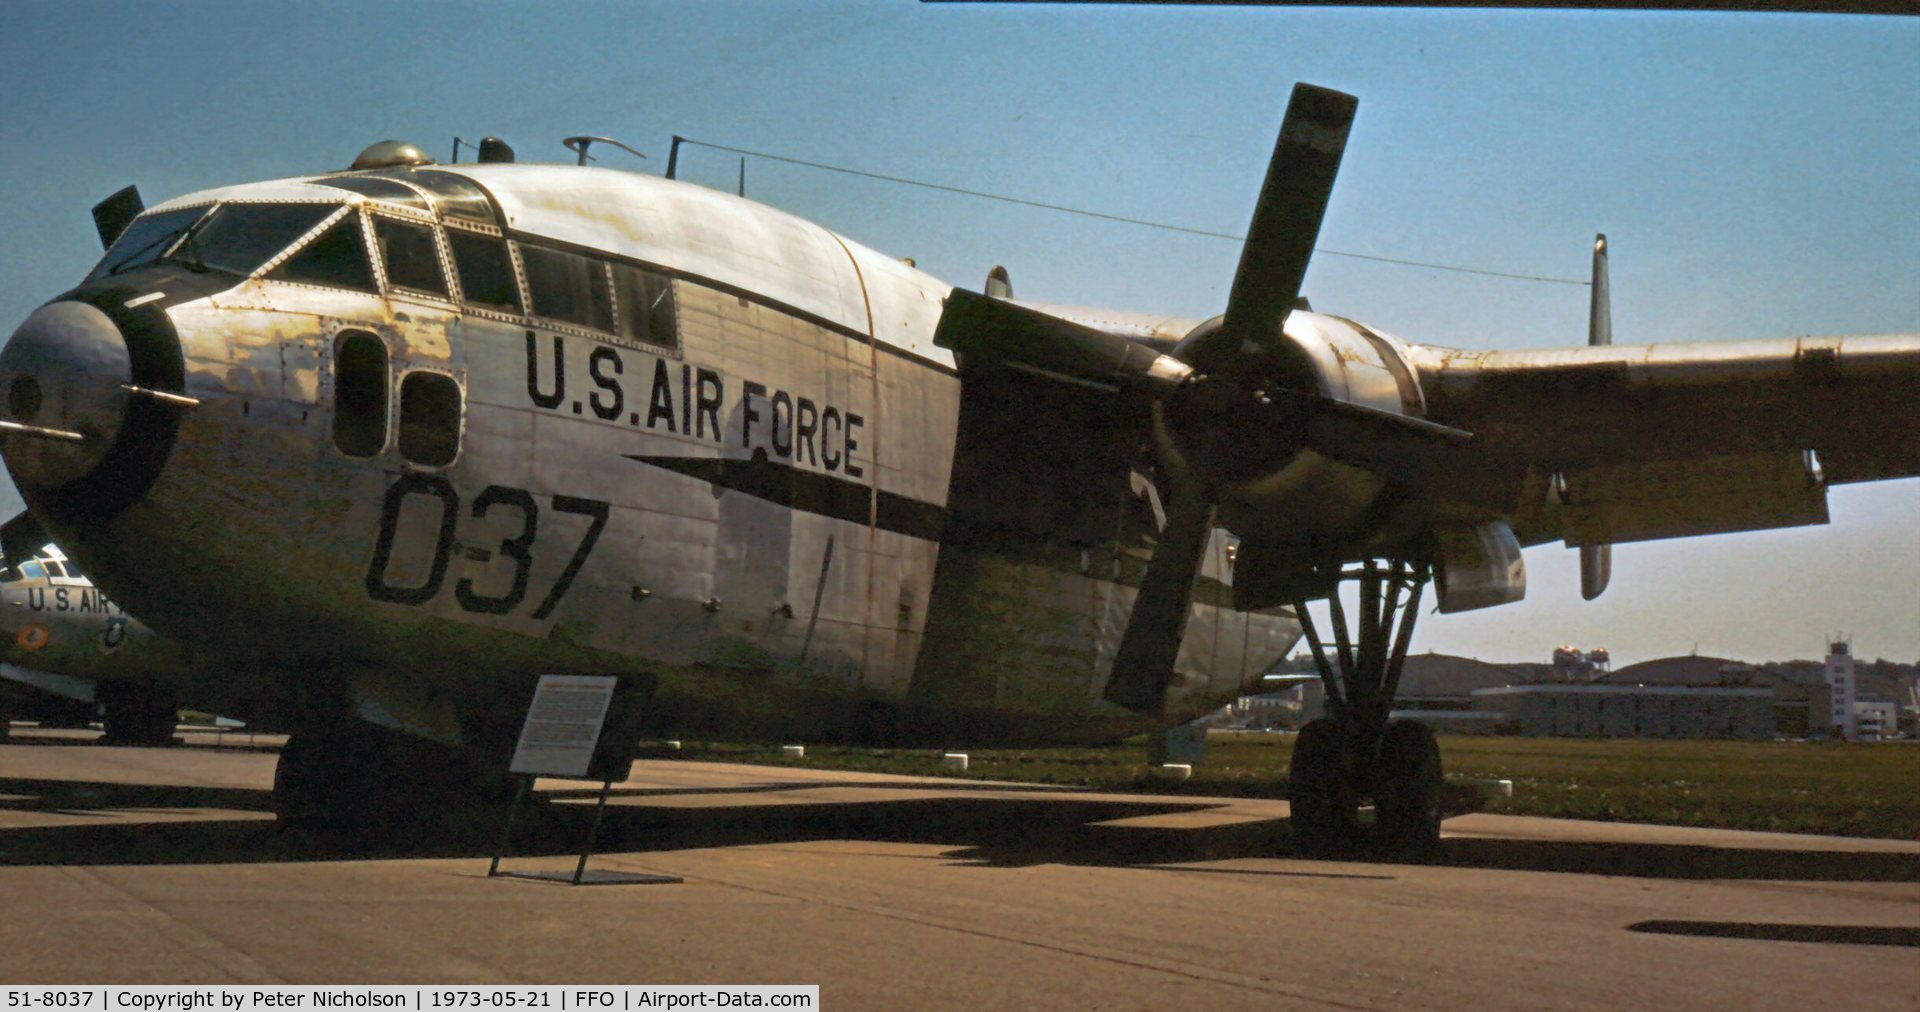 51-8037, 1951 Fairchild C-119J-FA Flying Boxcar C/N 10915, As displayed in the summer of 1973.